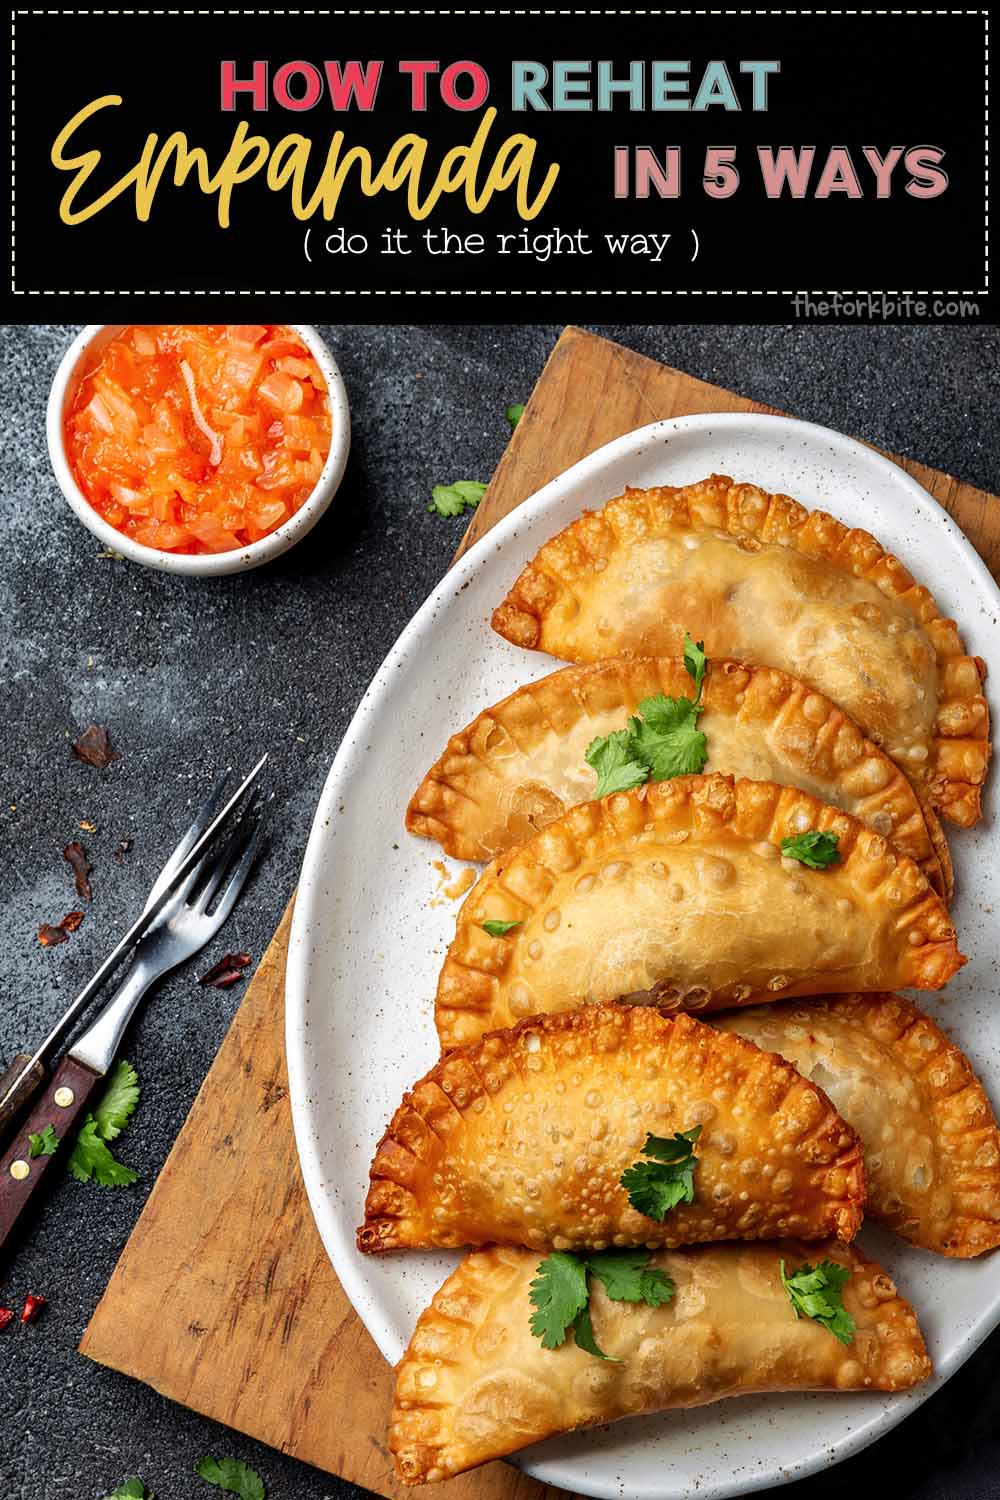 If you would like to find out how to reheat empanadas while maintaining the empanada’s original taste and texture, all you have to do is read on.